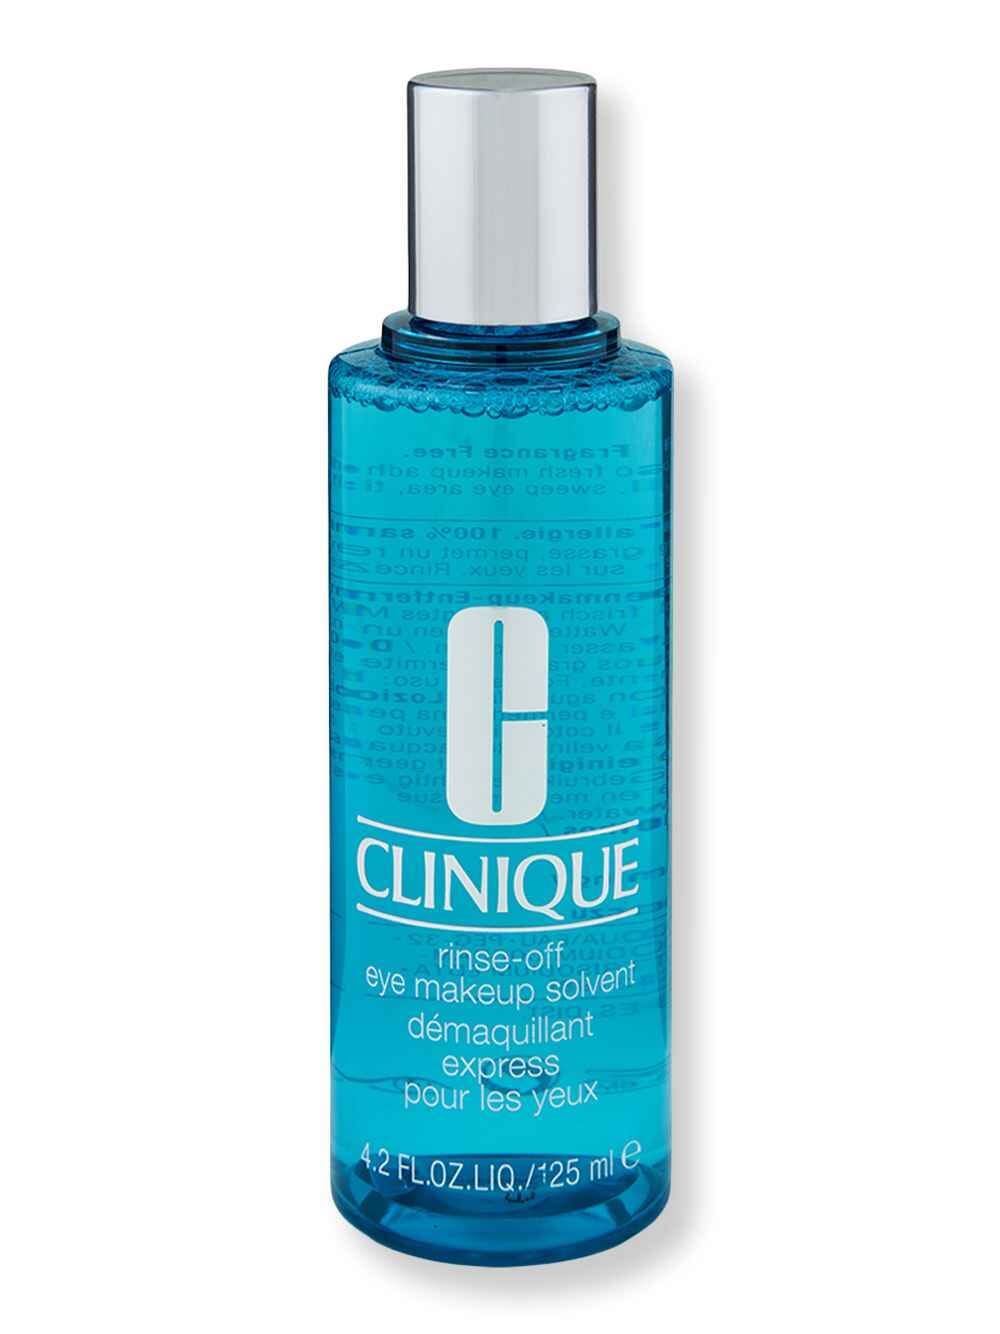 Clinique Clinique Rinse-Off Eye Make Up Solvent 125 ml Makeup Removers 